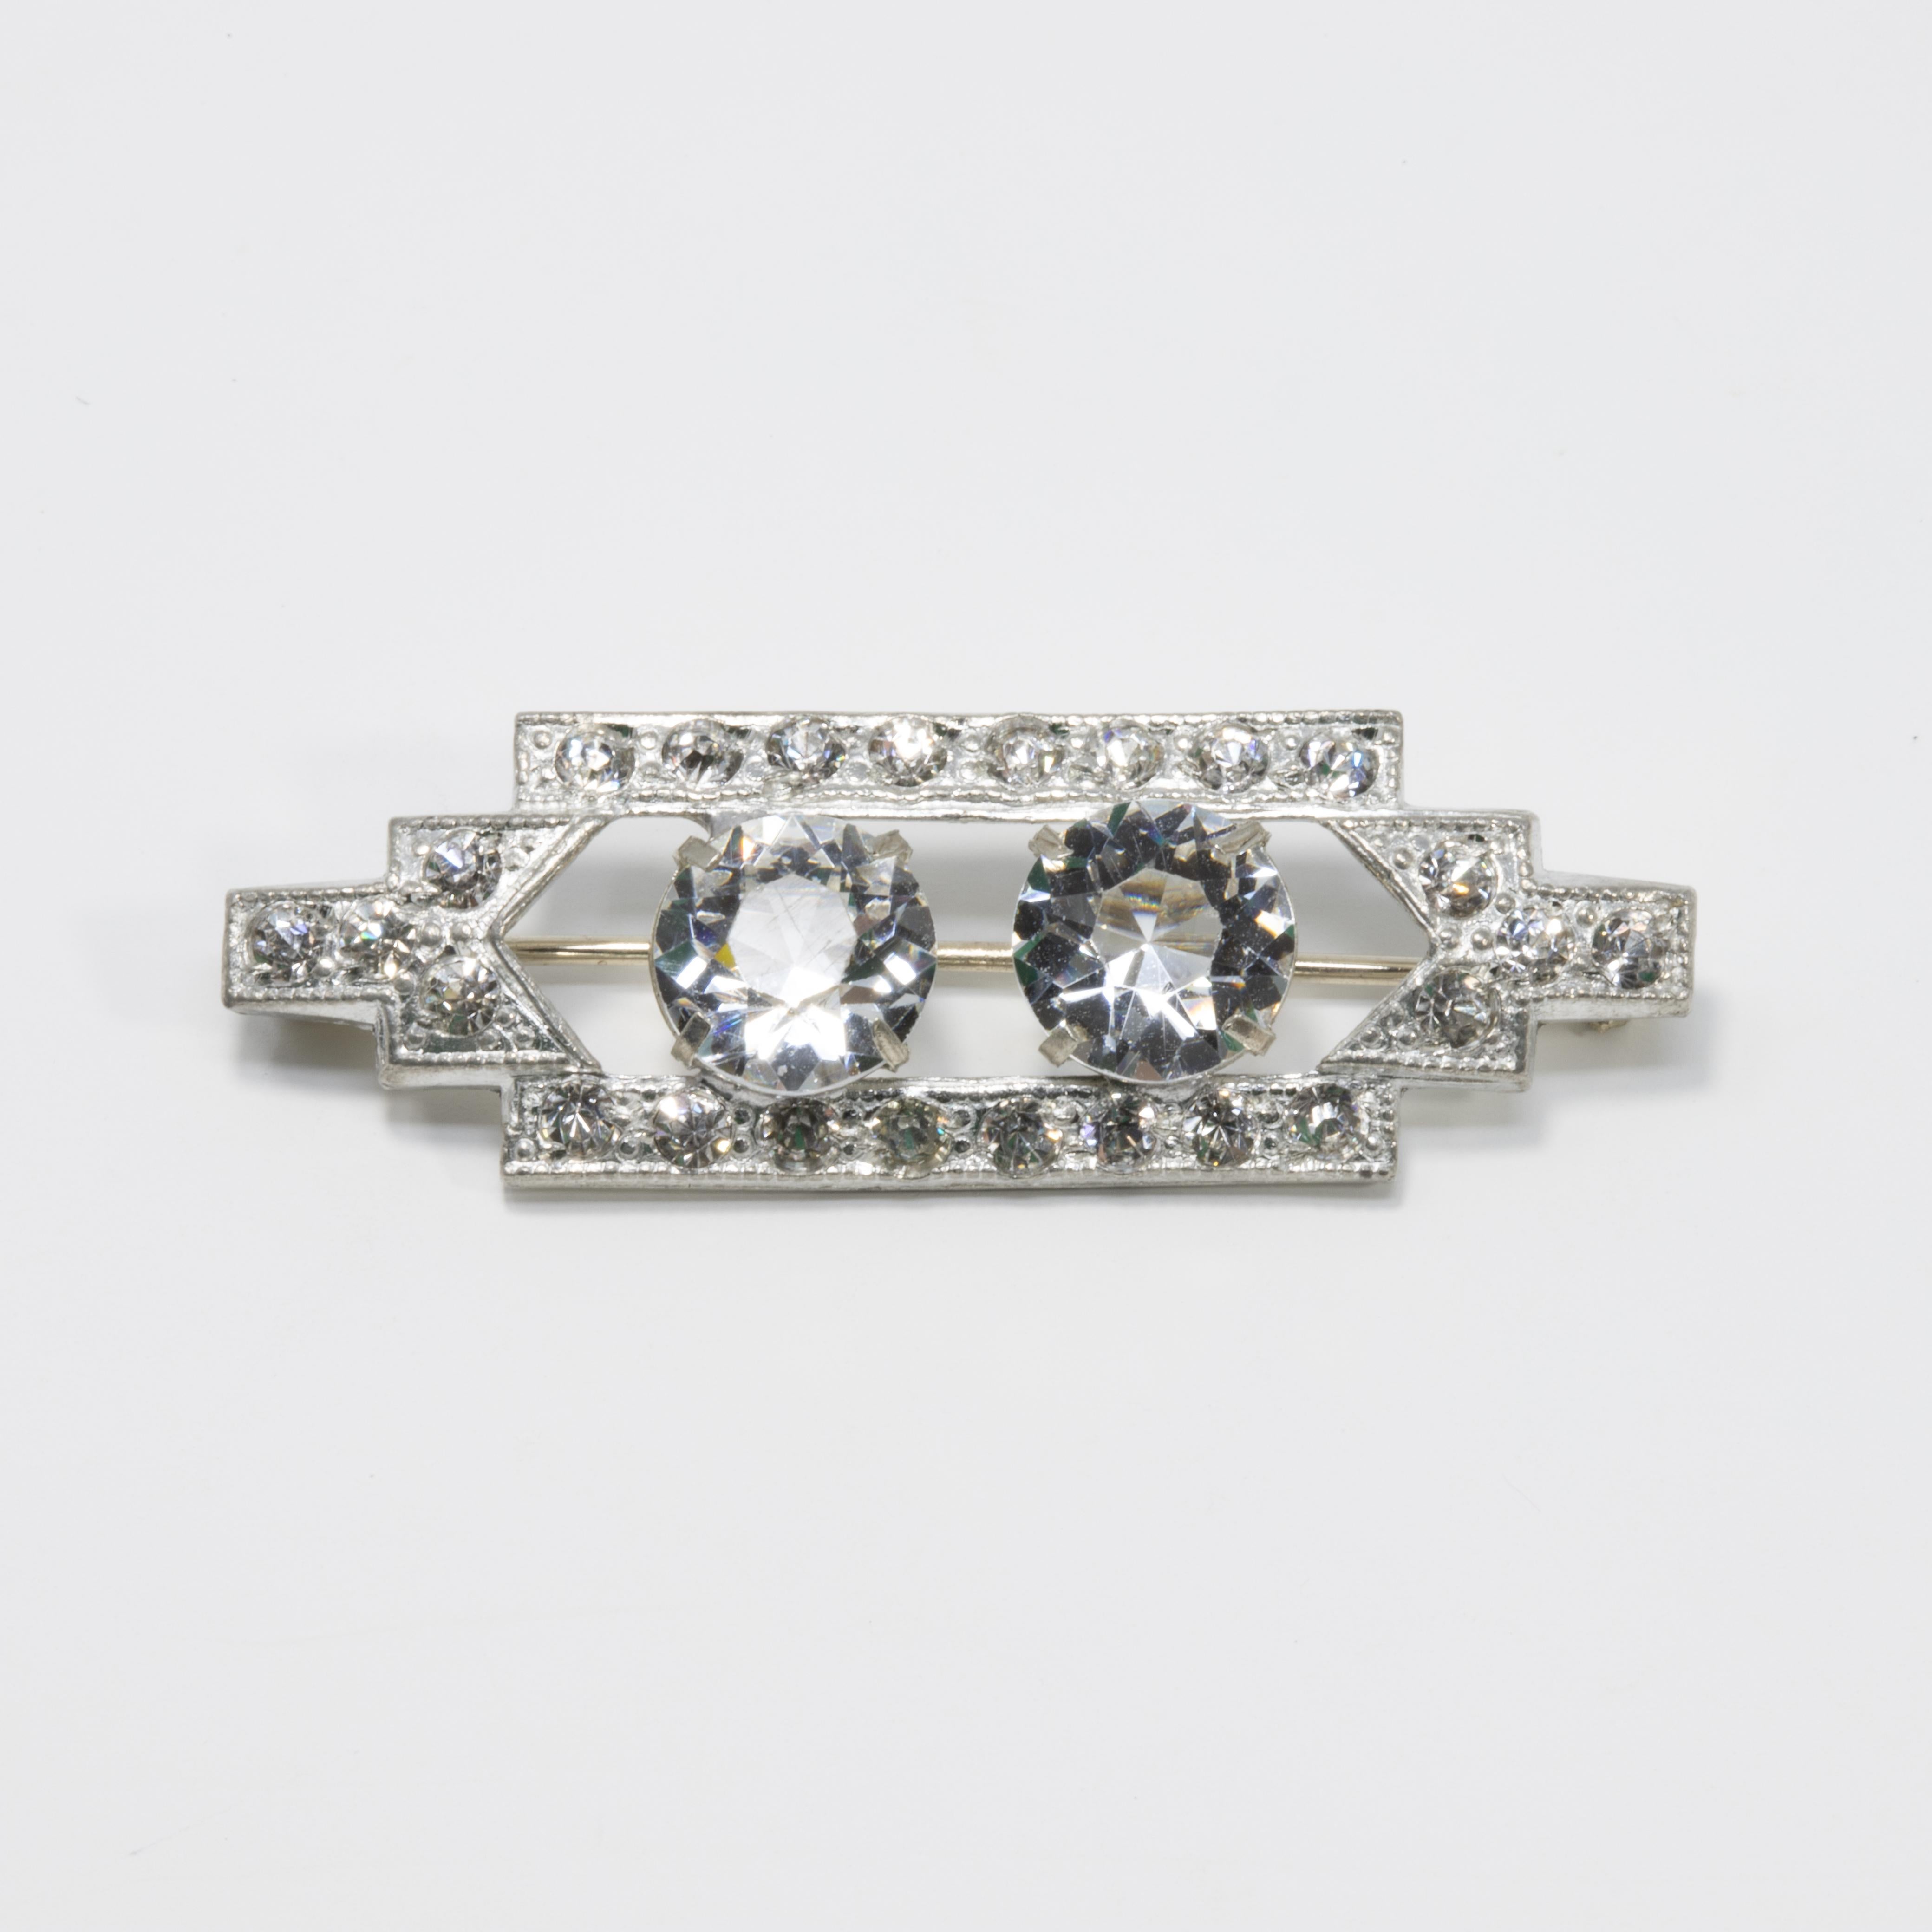 A sparkling art-deco pin from the early 1900s. This brooch features two larger clear crystals prong set in the center, surrounded by a rectangular silvertone setting accented with small crystals.